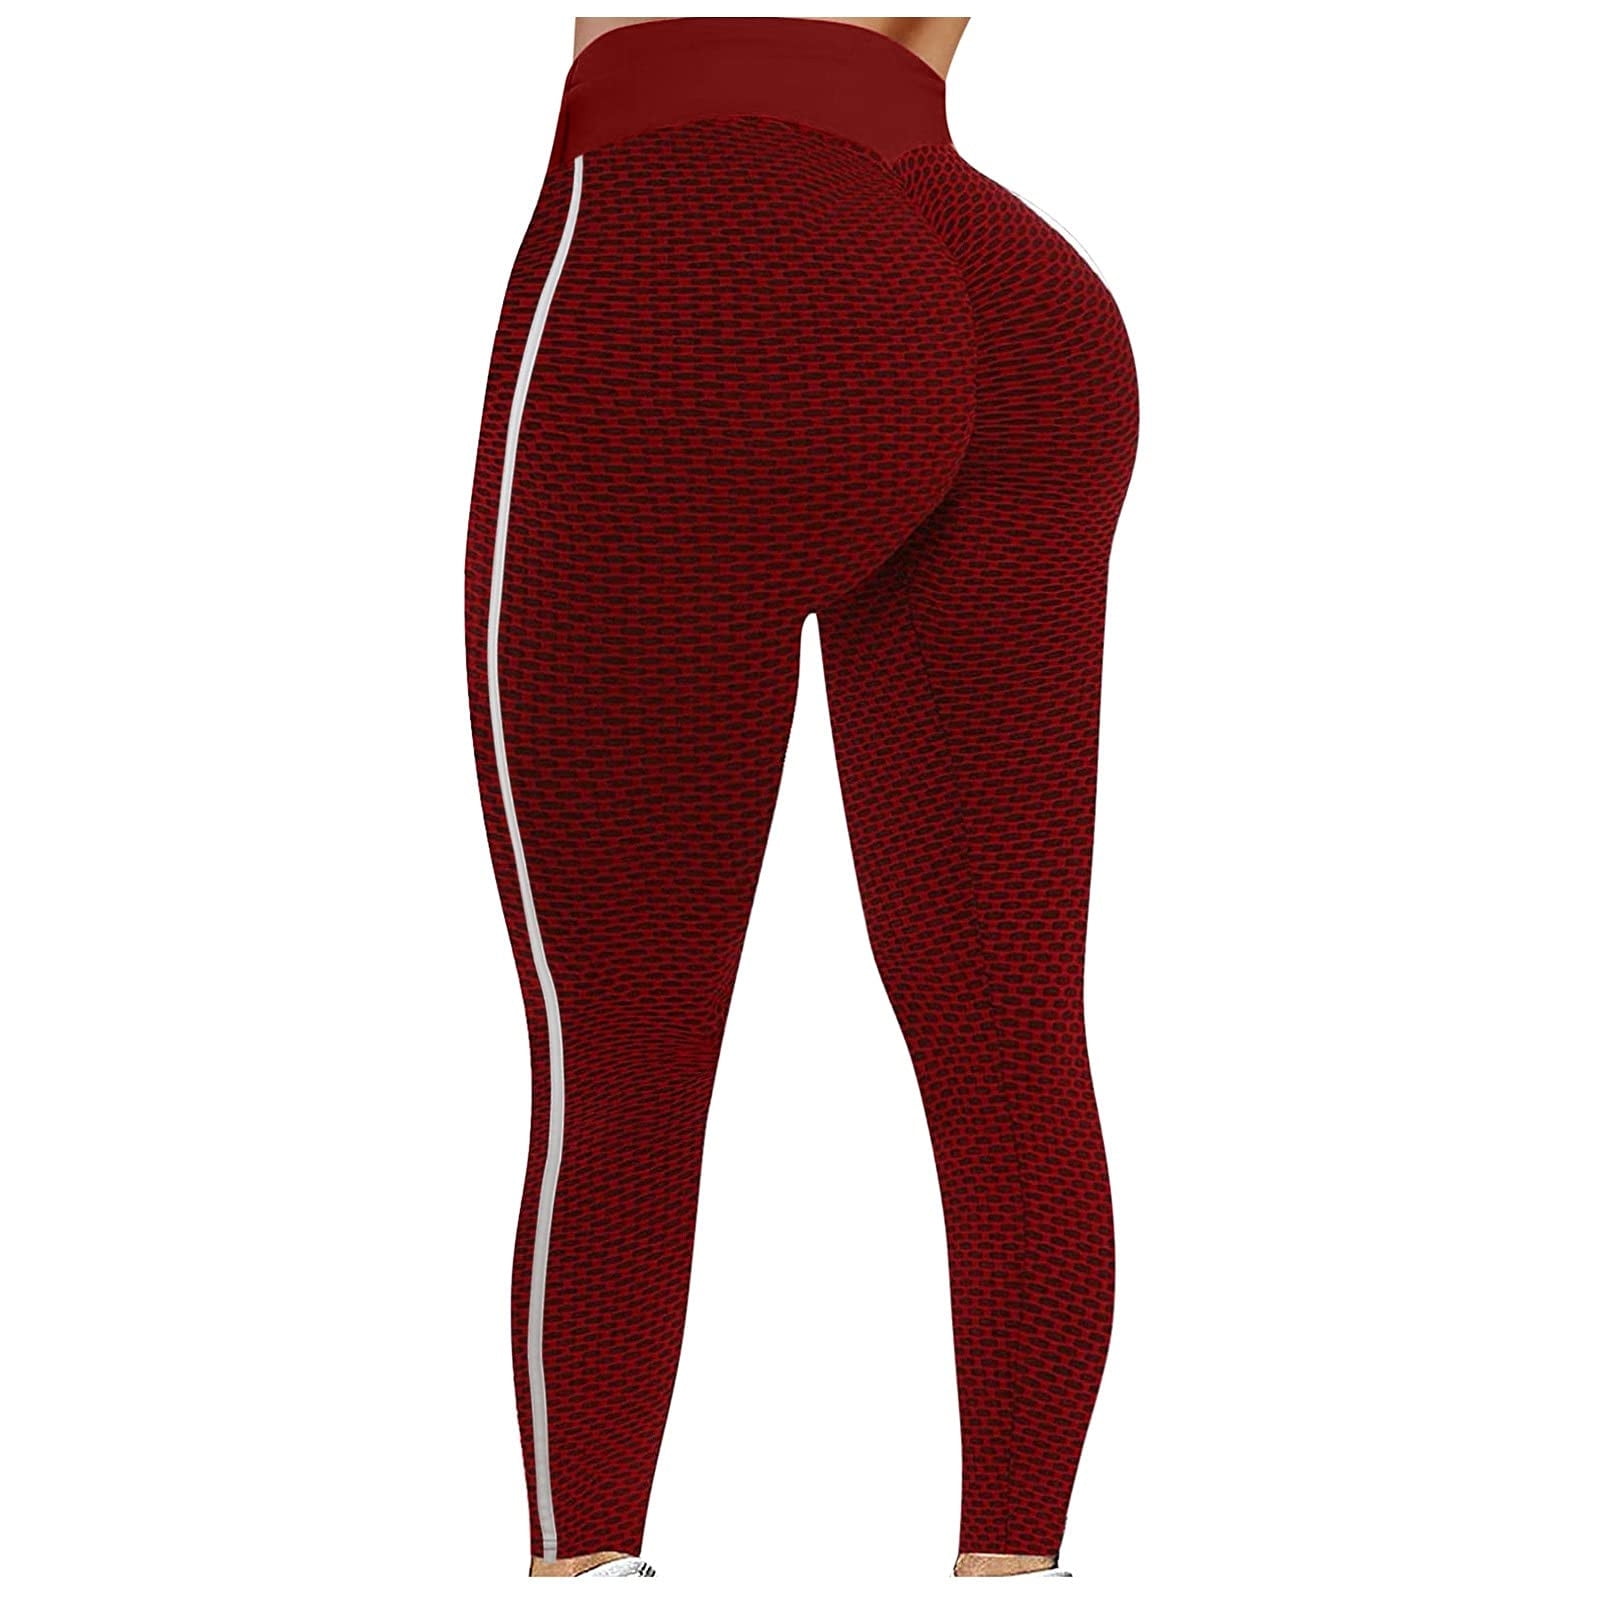 REORIAFEE Women Yoga Active Workout Pants Scrunch Butt Lifting Workout Leggings High Waist Cellulite Compression Pants Tights Red XL - Walmart.com